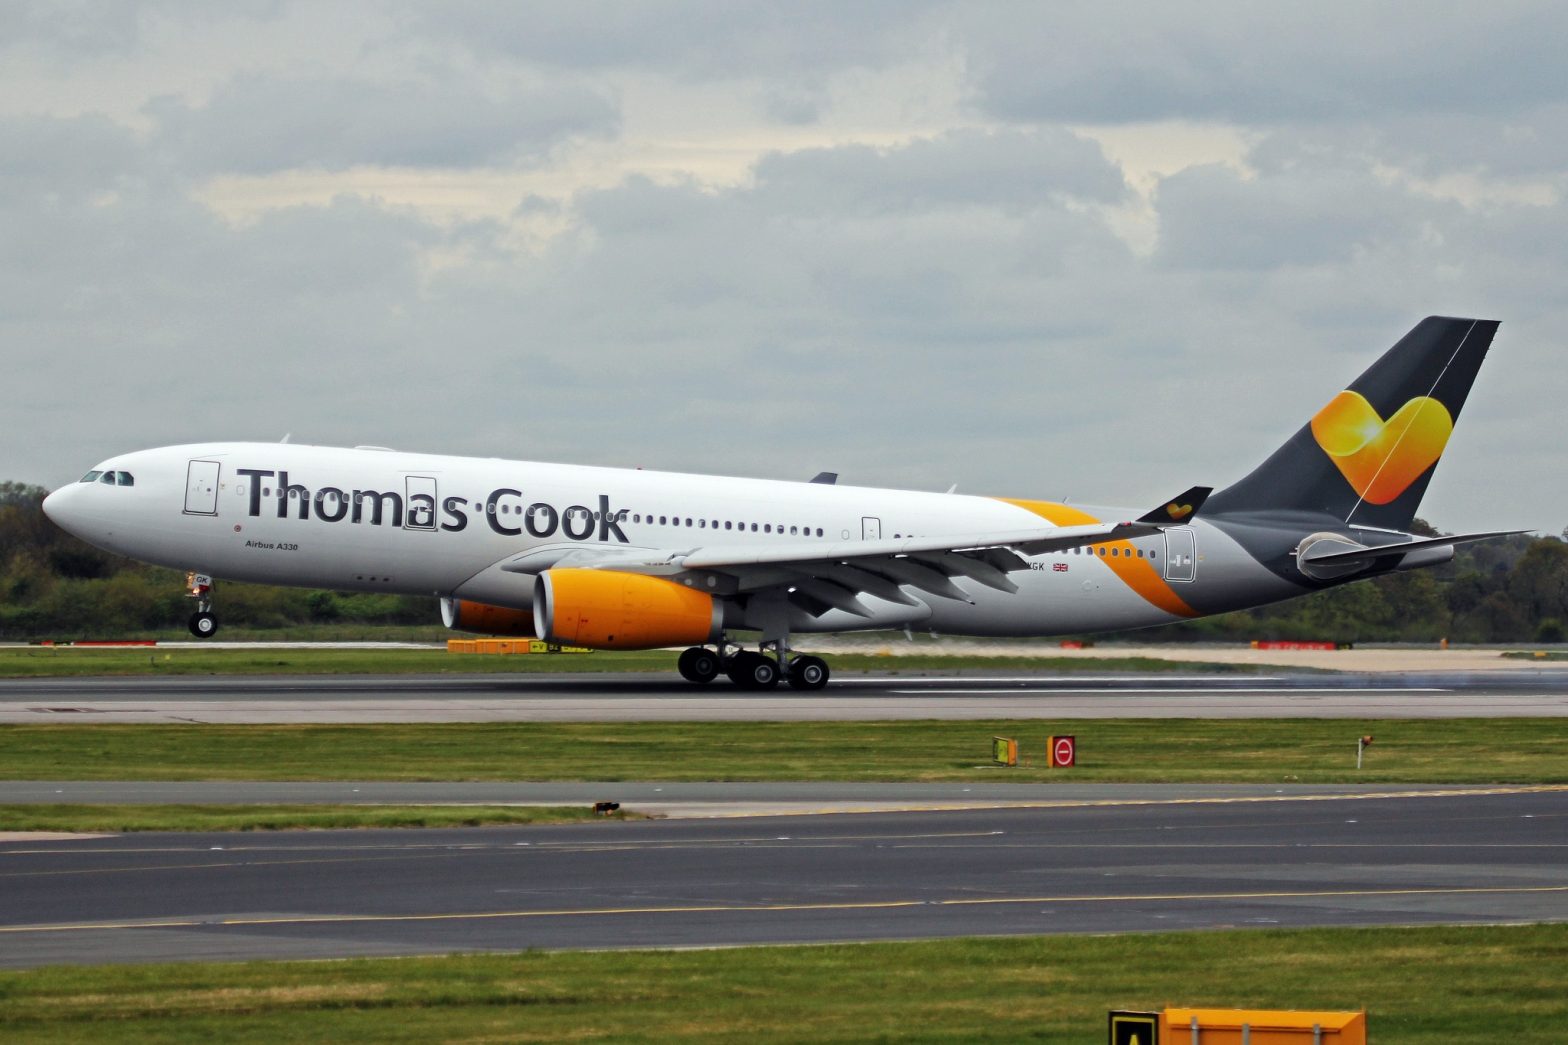 Thomas Cook: my own experience